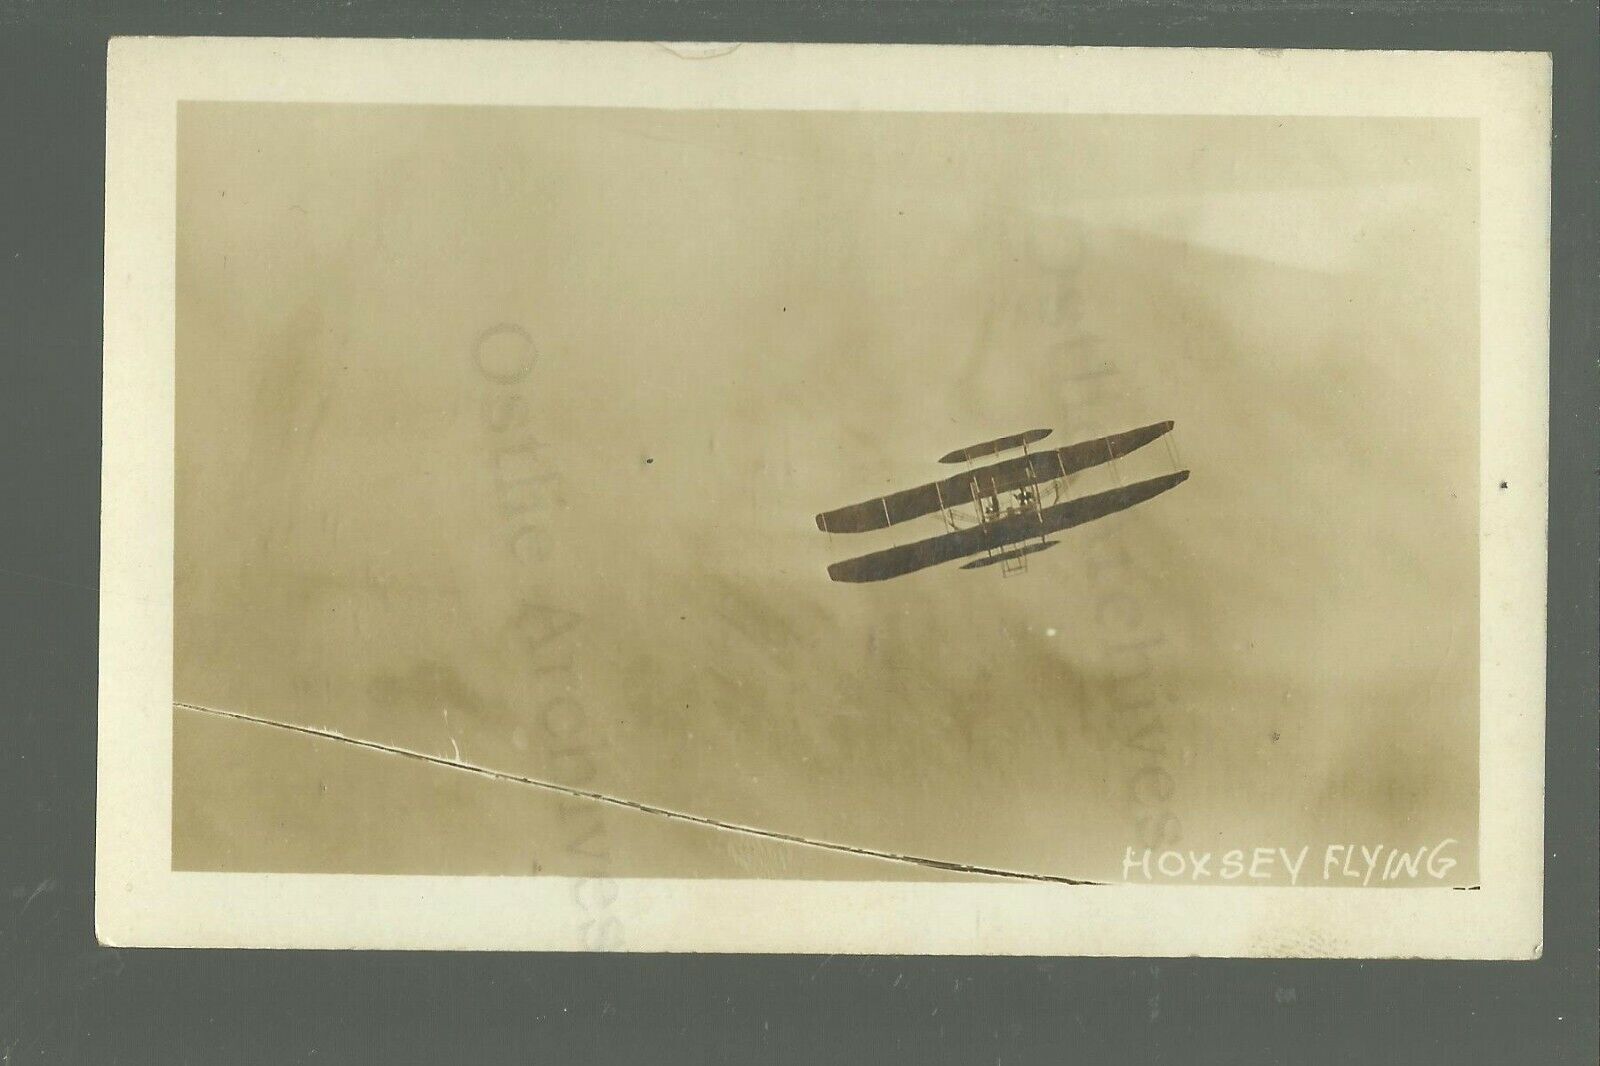 RP c1910 ARCHIBALD HOXSEY Pilot FLYING AIRPLANE Plane WRIGHT BROTHERS Died CRASH